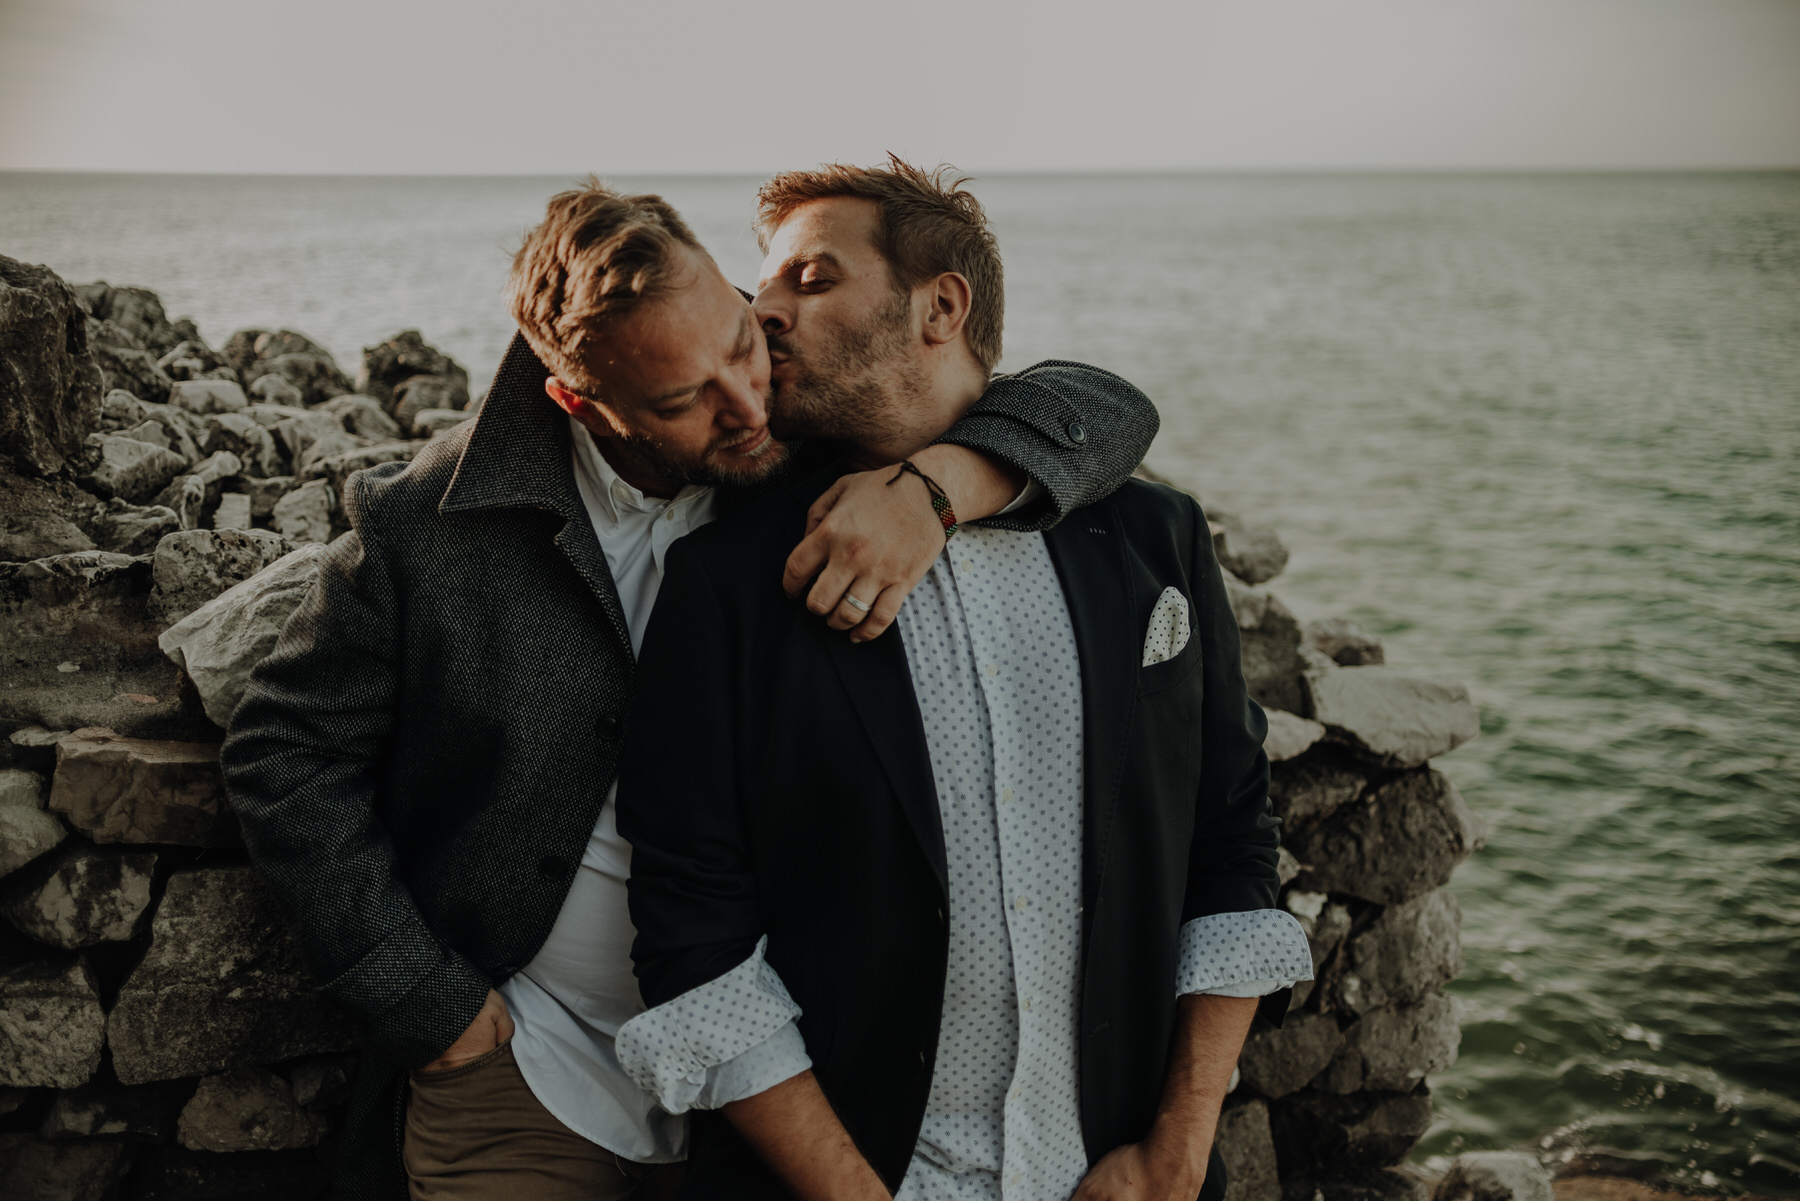 Giancarlo+Daniele, husbands' couple session at sunset on the beach